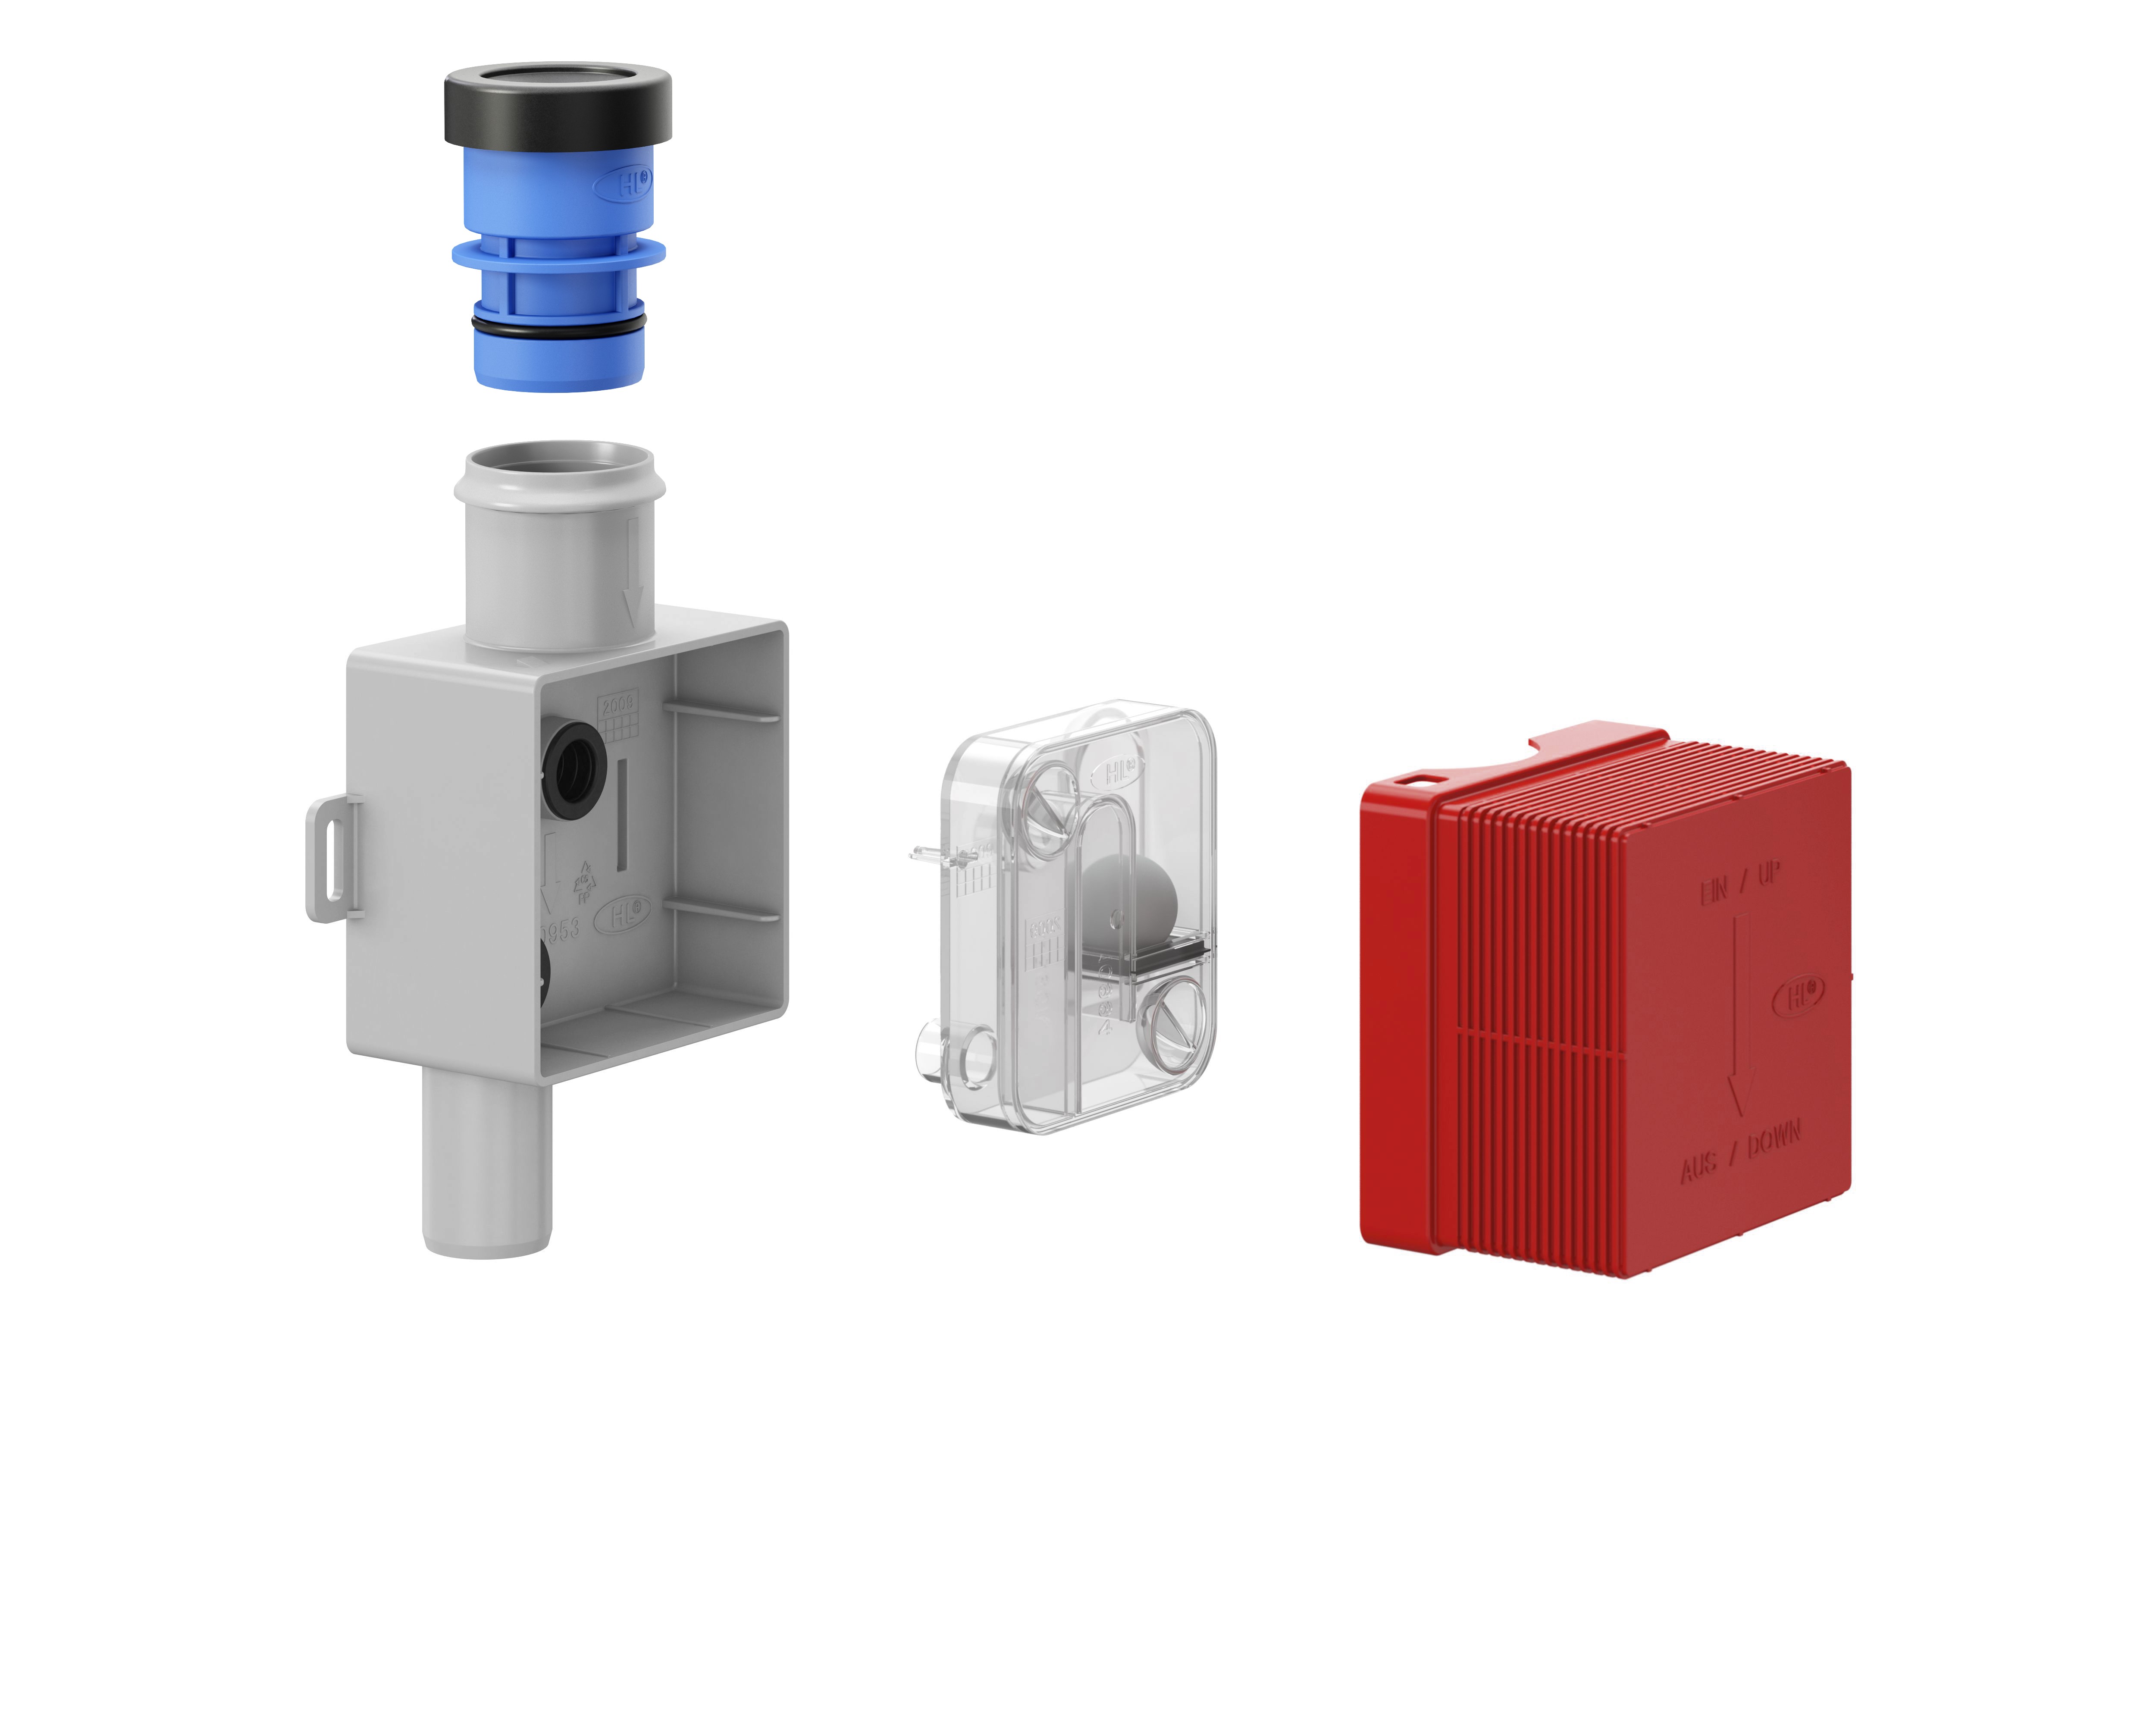 Available as an accessory: The blue hygiene connection adapter for draining condensate into the waste water system in accordance with DIN 1946-4:2008.  Photo: Dallmer GmbH + Co. KG